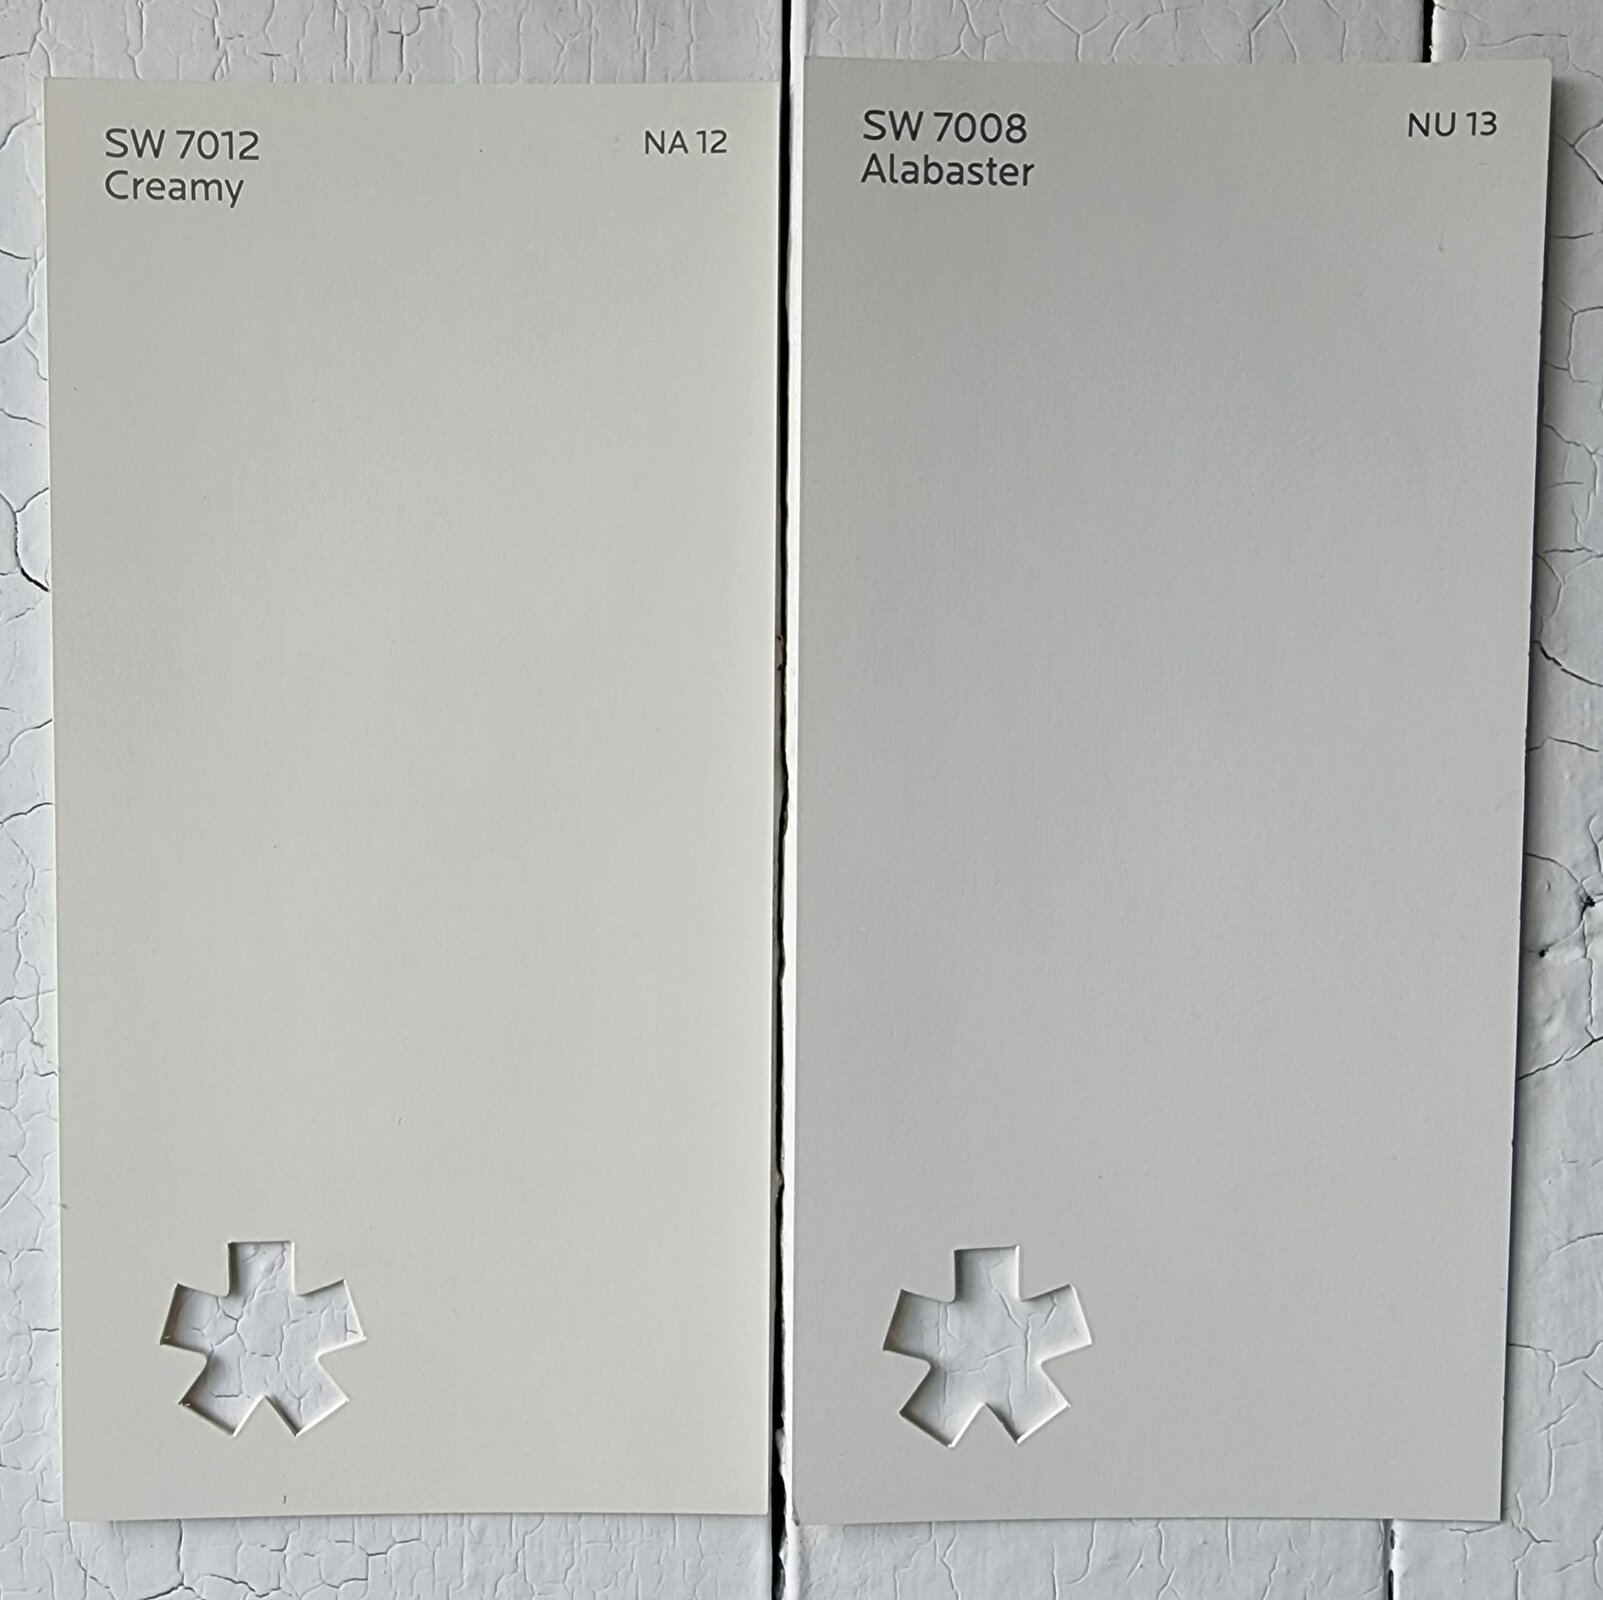  Creamy vs Alabaster by Sherwin Williams scaled